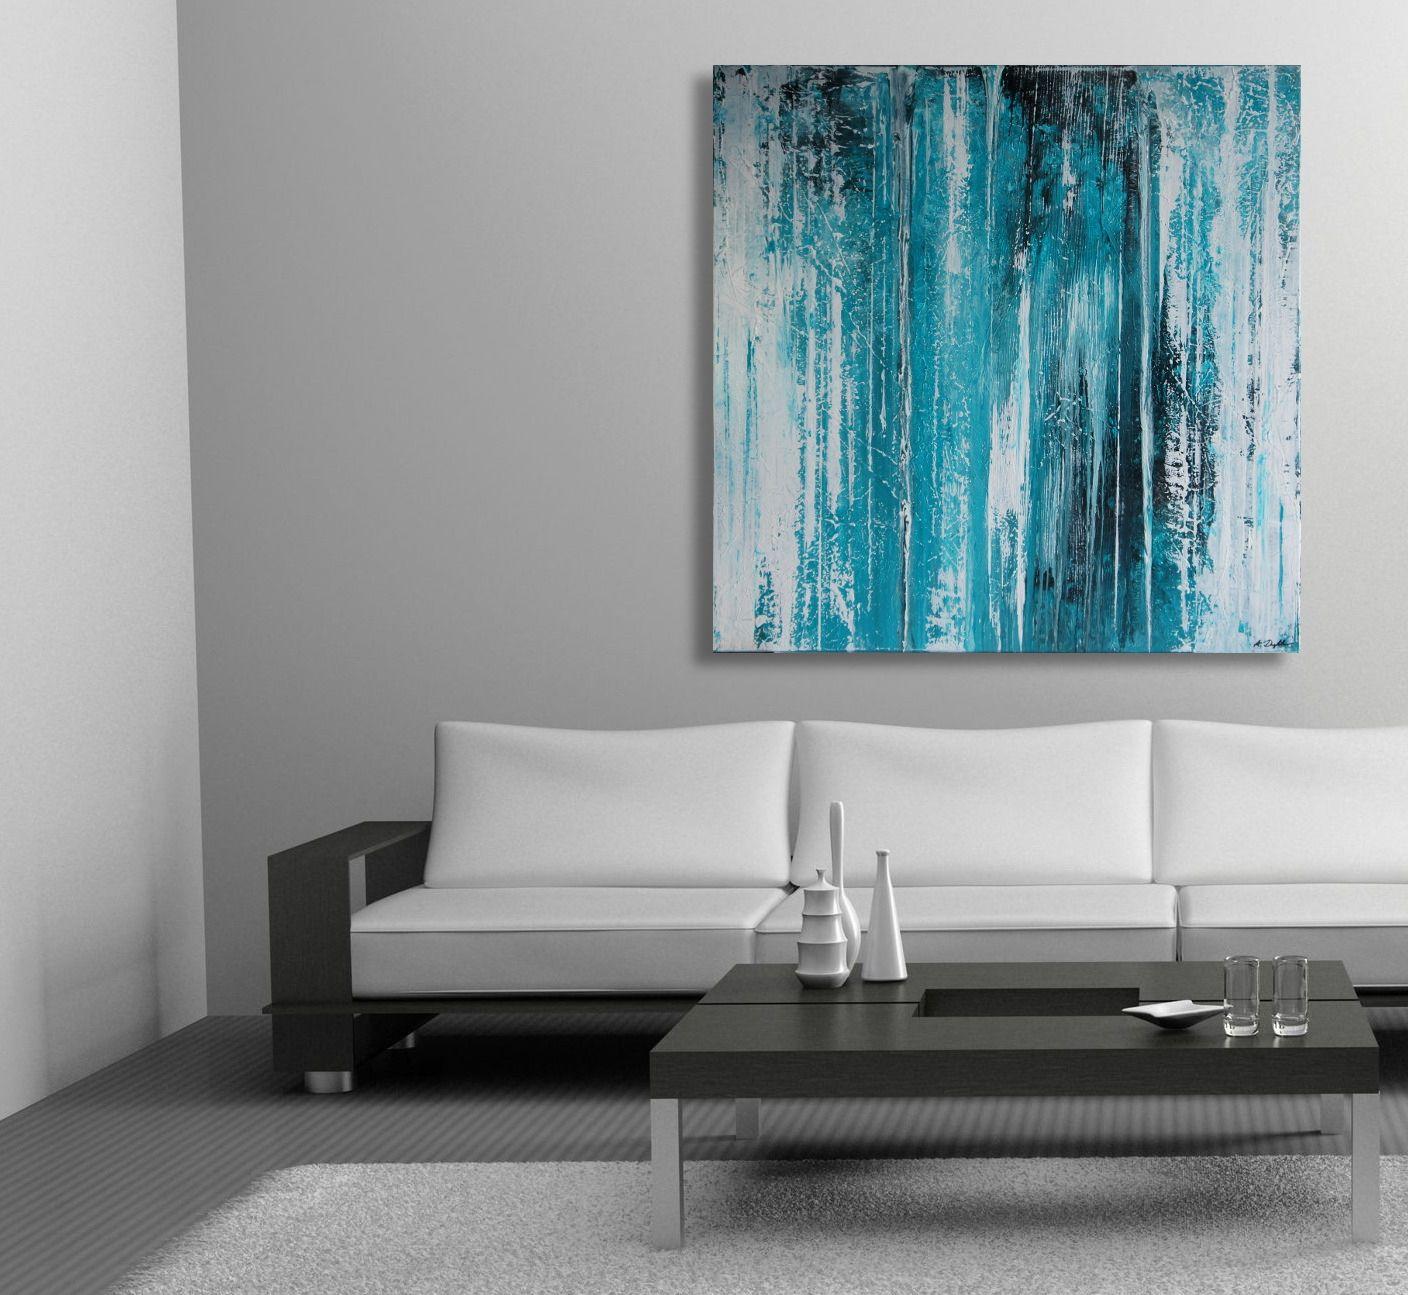 Hereâ€™s a large square piece in colors of the amazonite gemstone (turquoise) with black whining through the white surface. Itâ€™s the sister painting to Amazonite Revealed Iâ€¦.Enjoy!    Unique painting using high-quality acrylic colors on